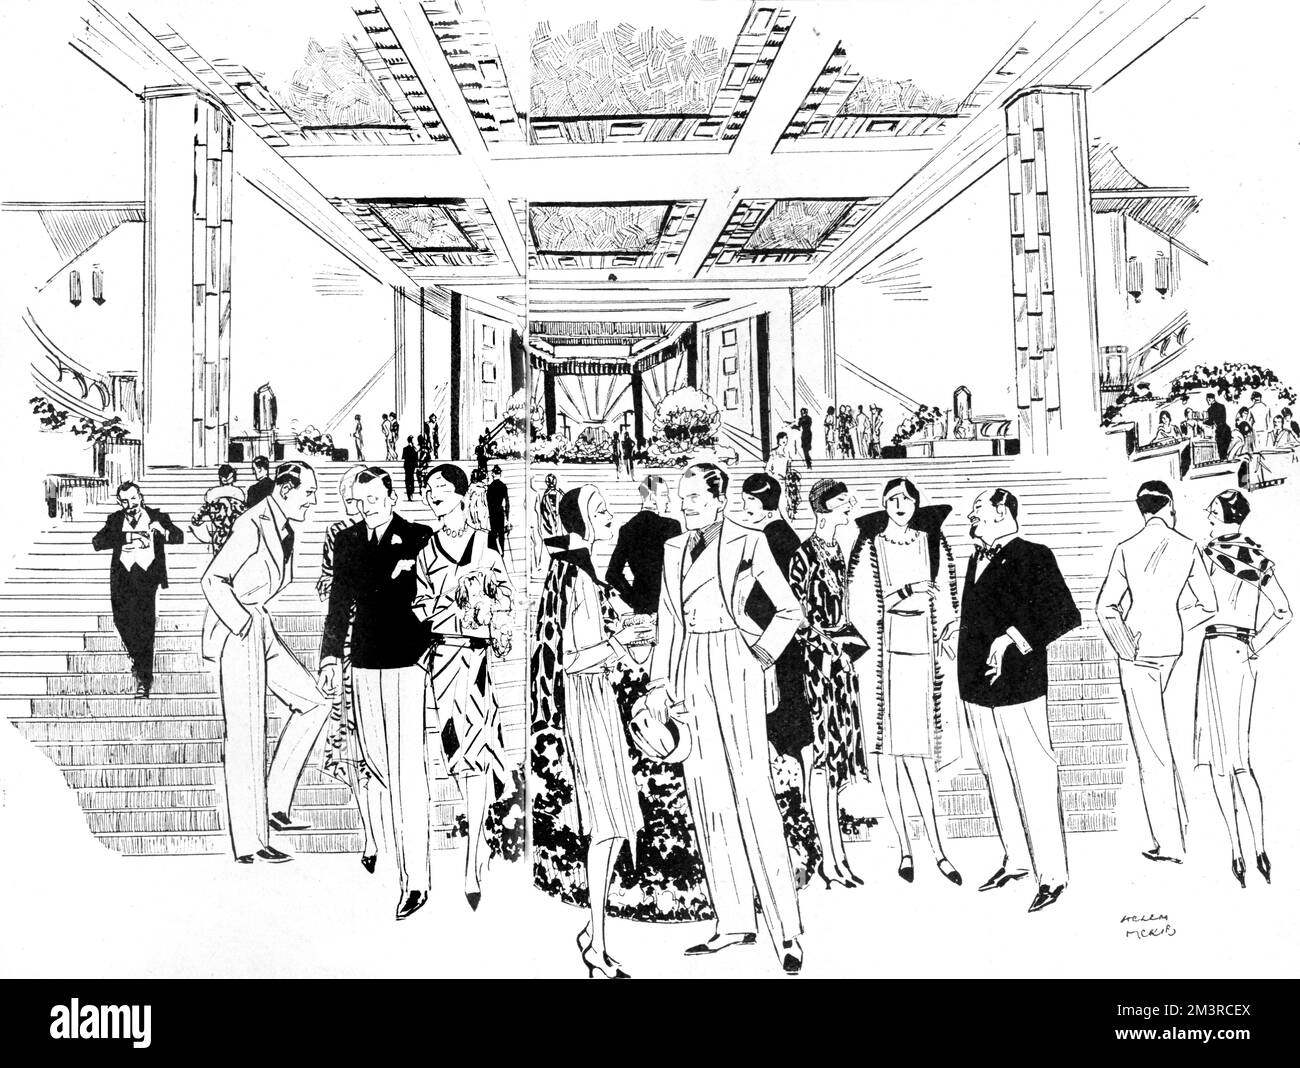 Impression of the Palais de la Mediteranee, the new, palatial casino built at Nice in 1929 by American millionaire, Frank Jay Gould.  The marble staircase, seen here, was the widest in the world.      Date: 1930 Stock Photo